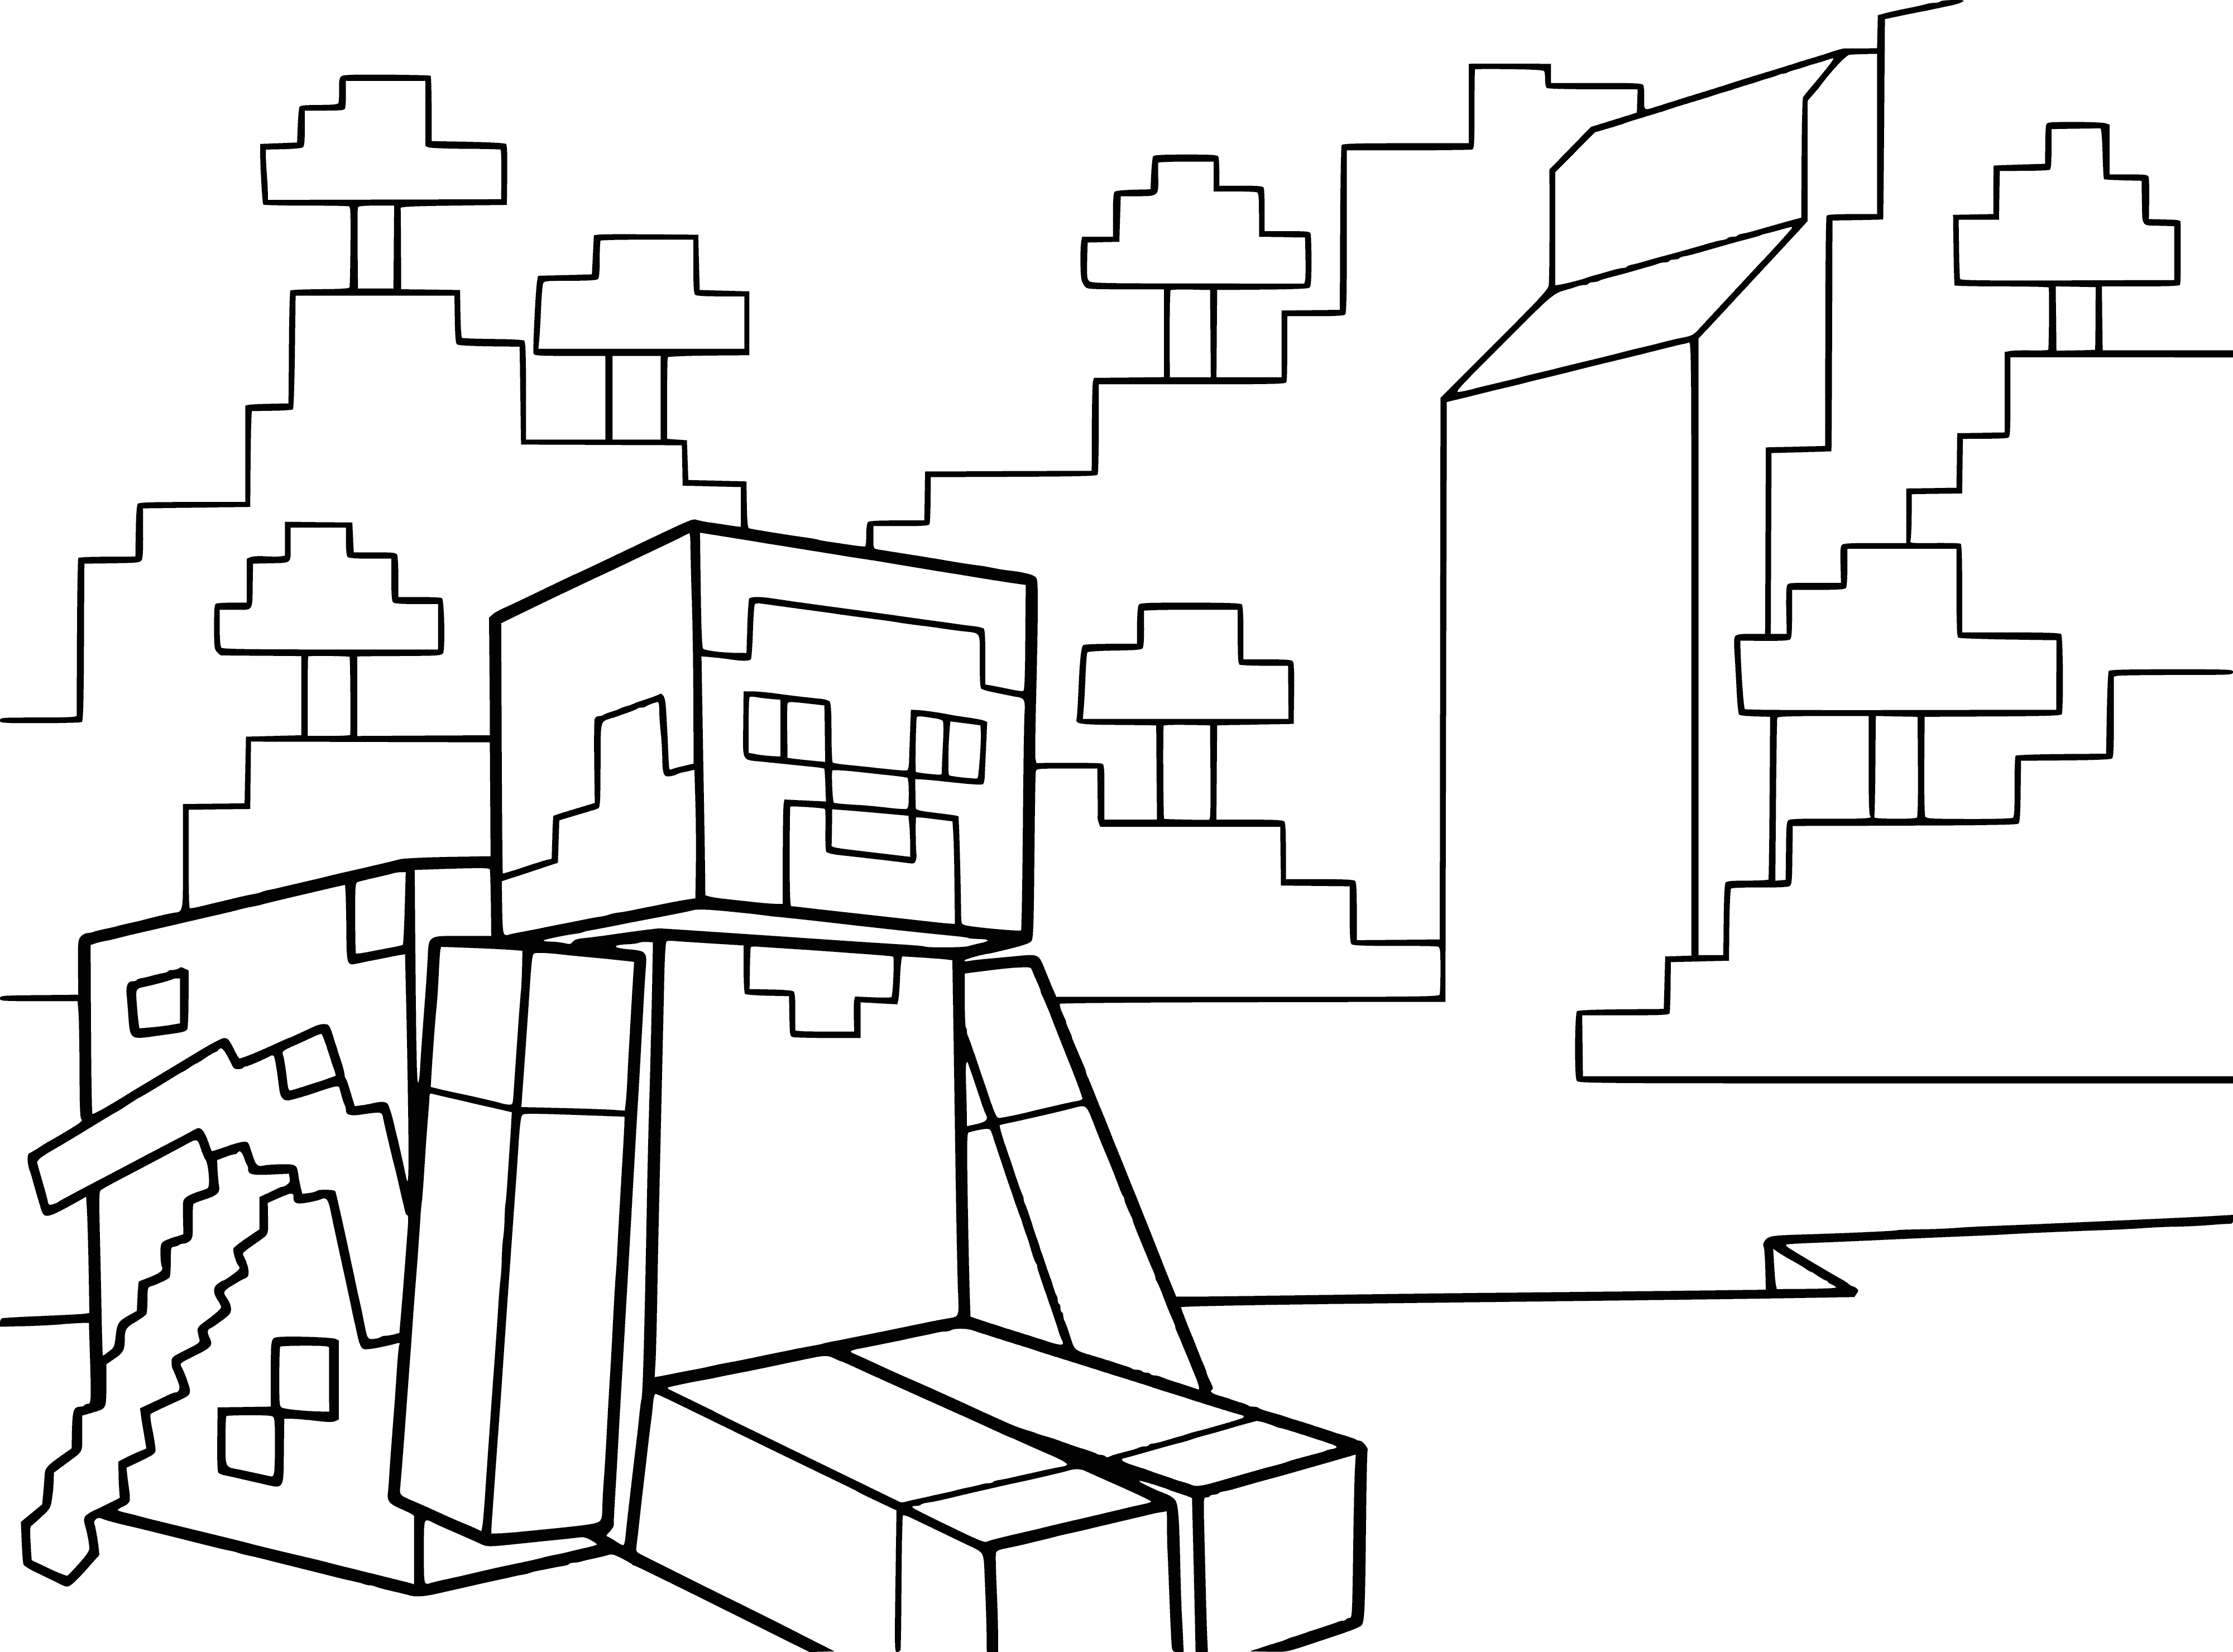 coloring page: In Minecraft coloring page, there's a person crafting by green trees & blue sky w/white clouds, blue shirt & jeans, papers & pencils.